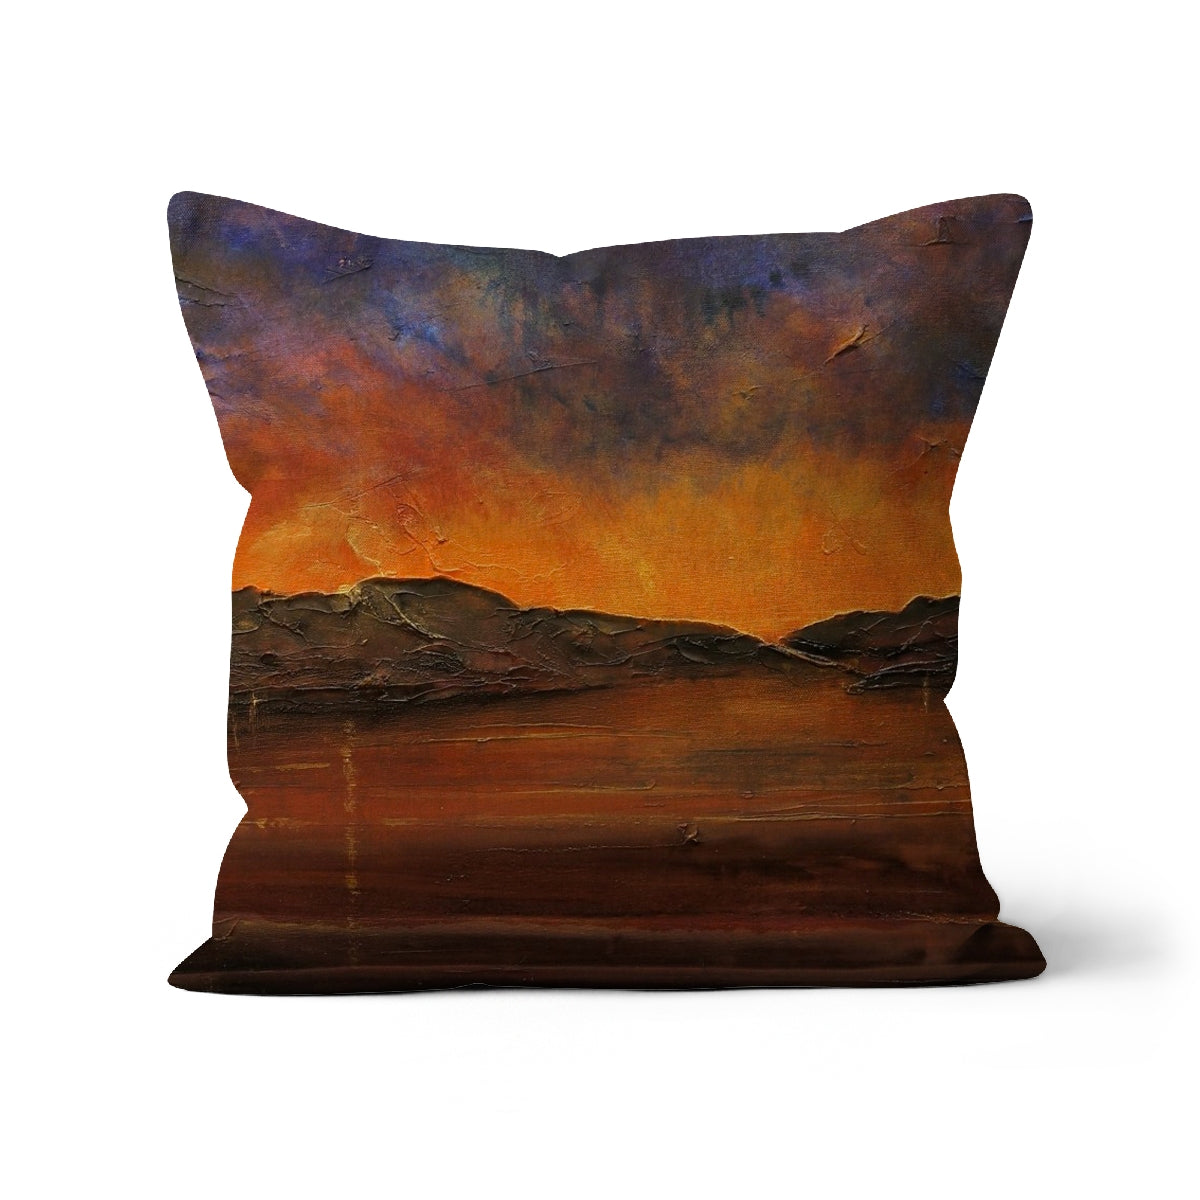 A Brooding Clyde Dusk Art Gifts Cushion-Cushions-River Clyde Art Gallery-Linen-16"x16"-Paintings, Prints, Homeware, Art Gifts From Scotland By Scottish Artist Kevin Hunter